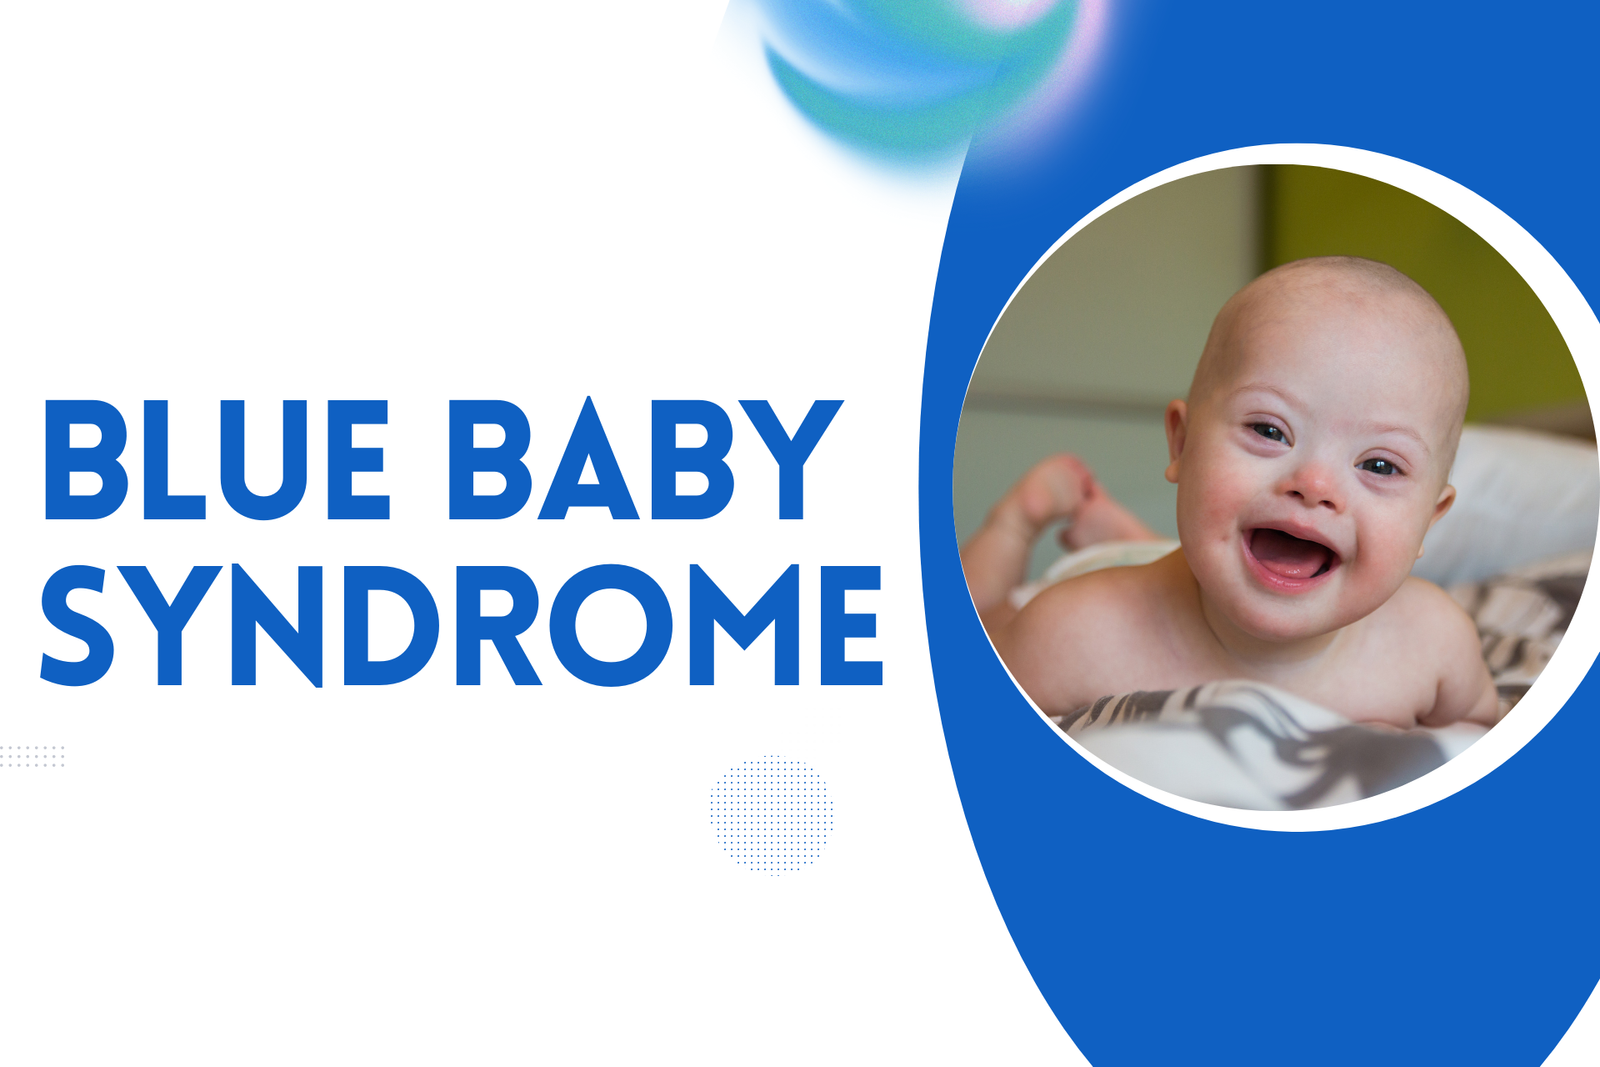 Blue Baby Syndrome treatment in India